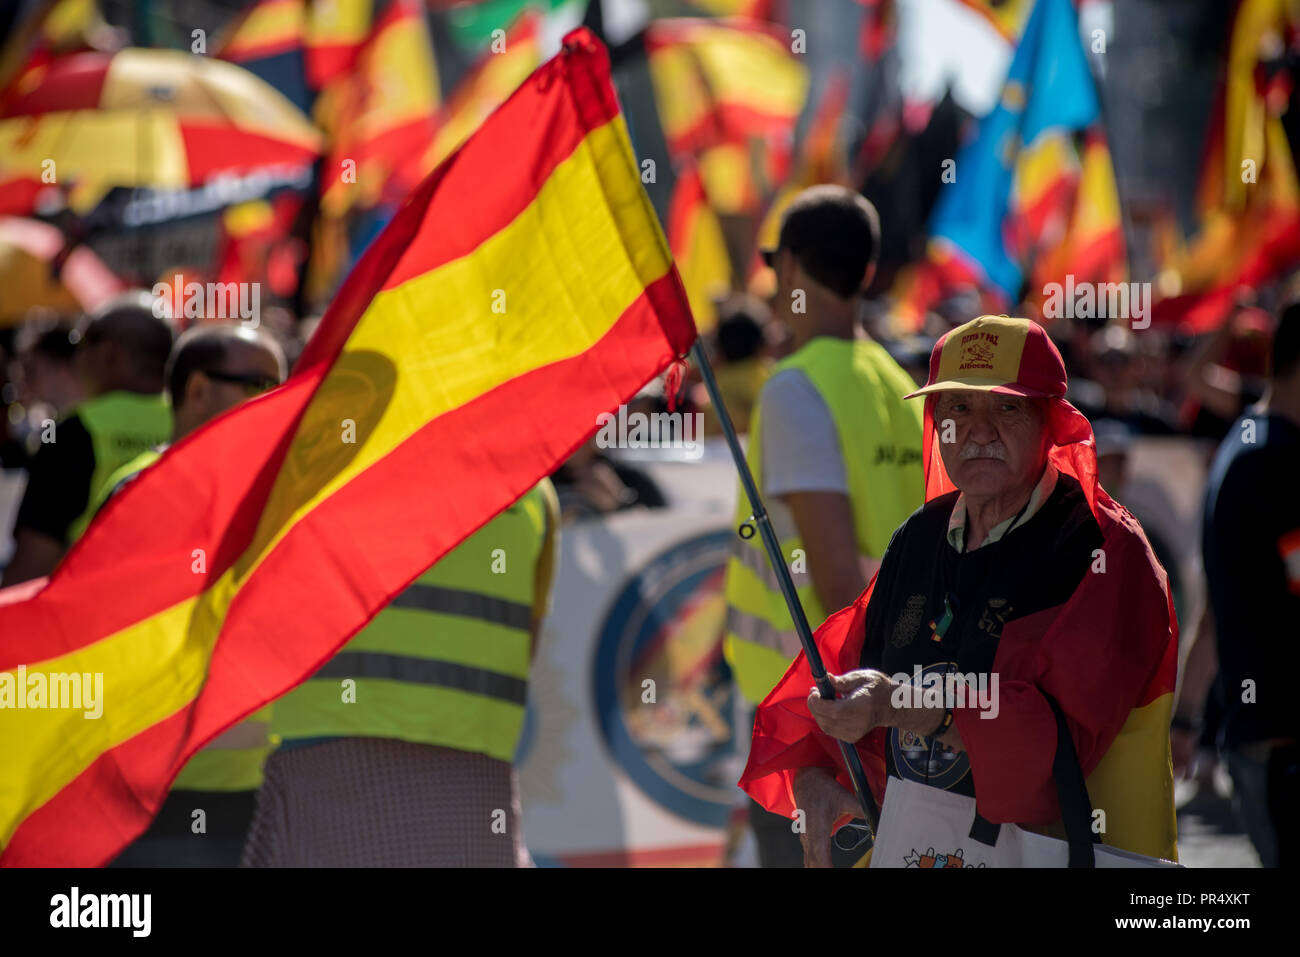 Barcelona, Catalonia, Spain. 29th Sep, 2018. A man carrying a Spanish flag during a Spanish police demonstration in Barcelona. Members and supporters of Spanish police Guardia Civil and Policia Nacional marched by Barcelona streets demanding salary improvements and in tribute to the participation against the Catalan referendum of independence a year ago. Credit: Jordi Boixareu/ZUMA Wire/Alamy Live News Stock Photo